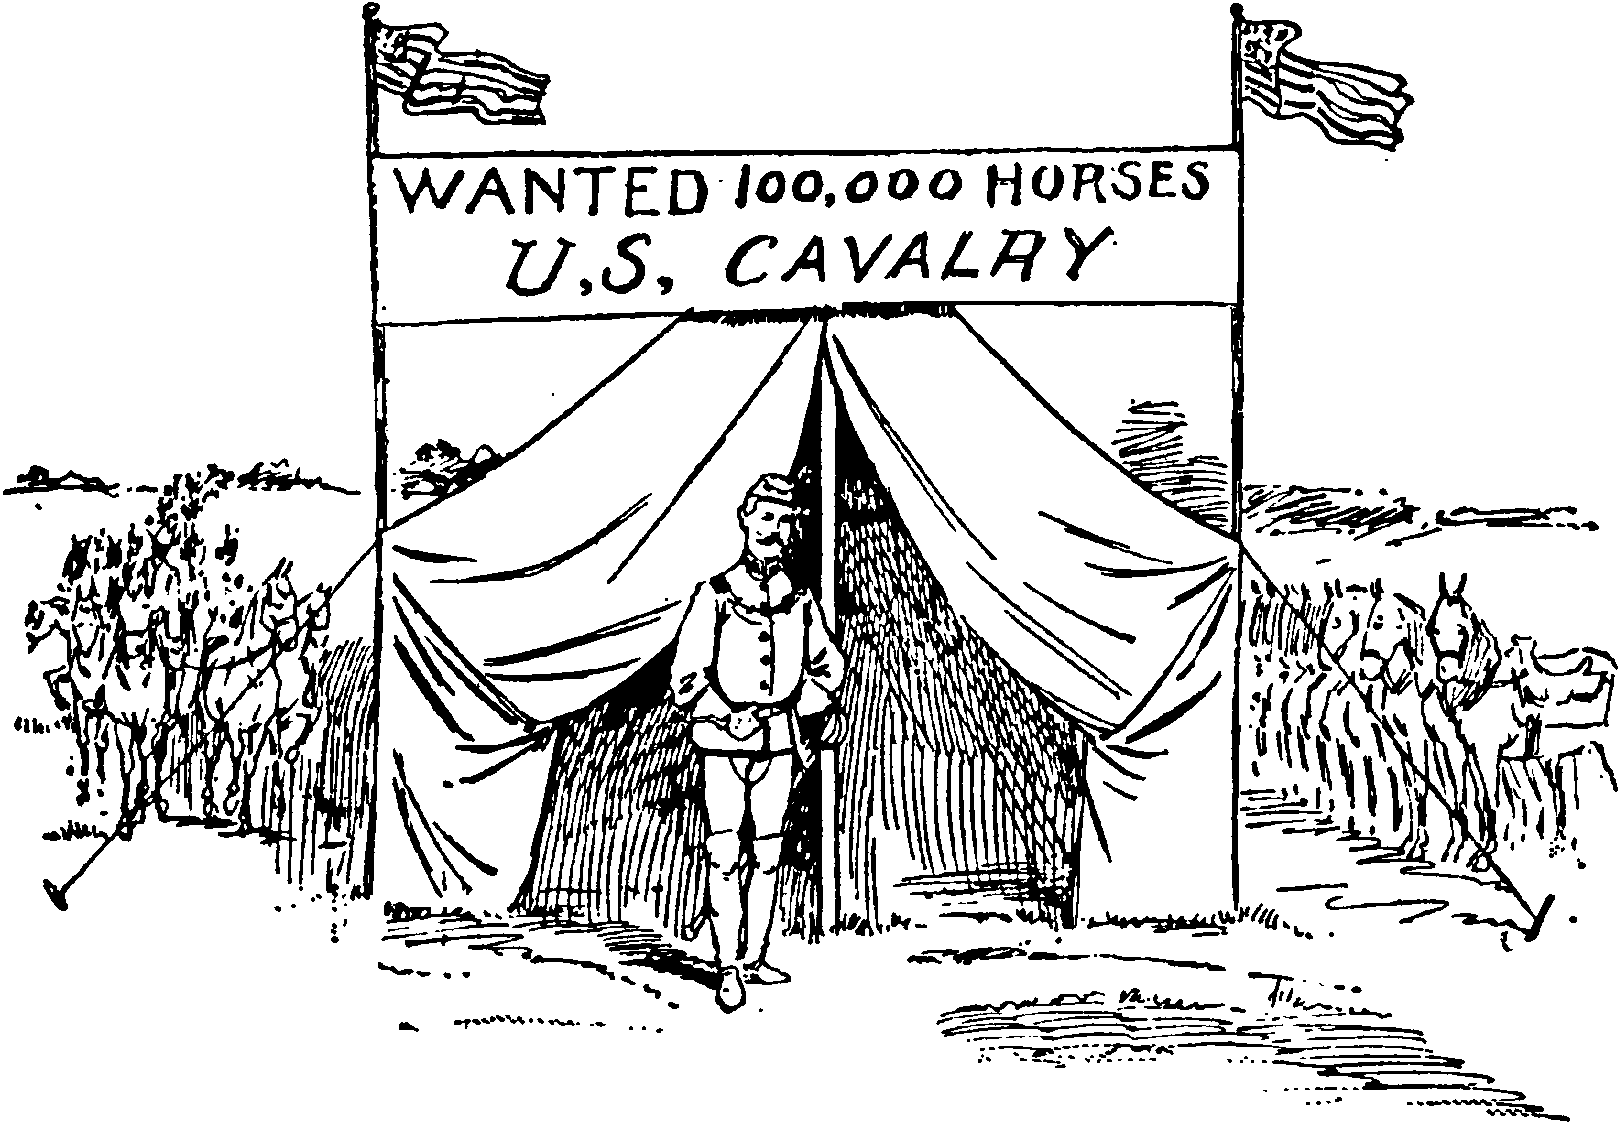 Wanted 100,000 horses. U.S. Cavalry. Coin’s Financial School by WD Harvey. 1894. Reformated for digital by Andy Chalkley in 2017.